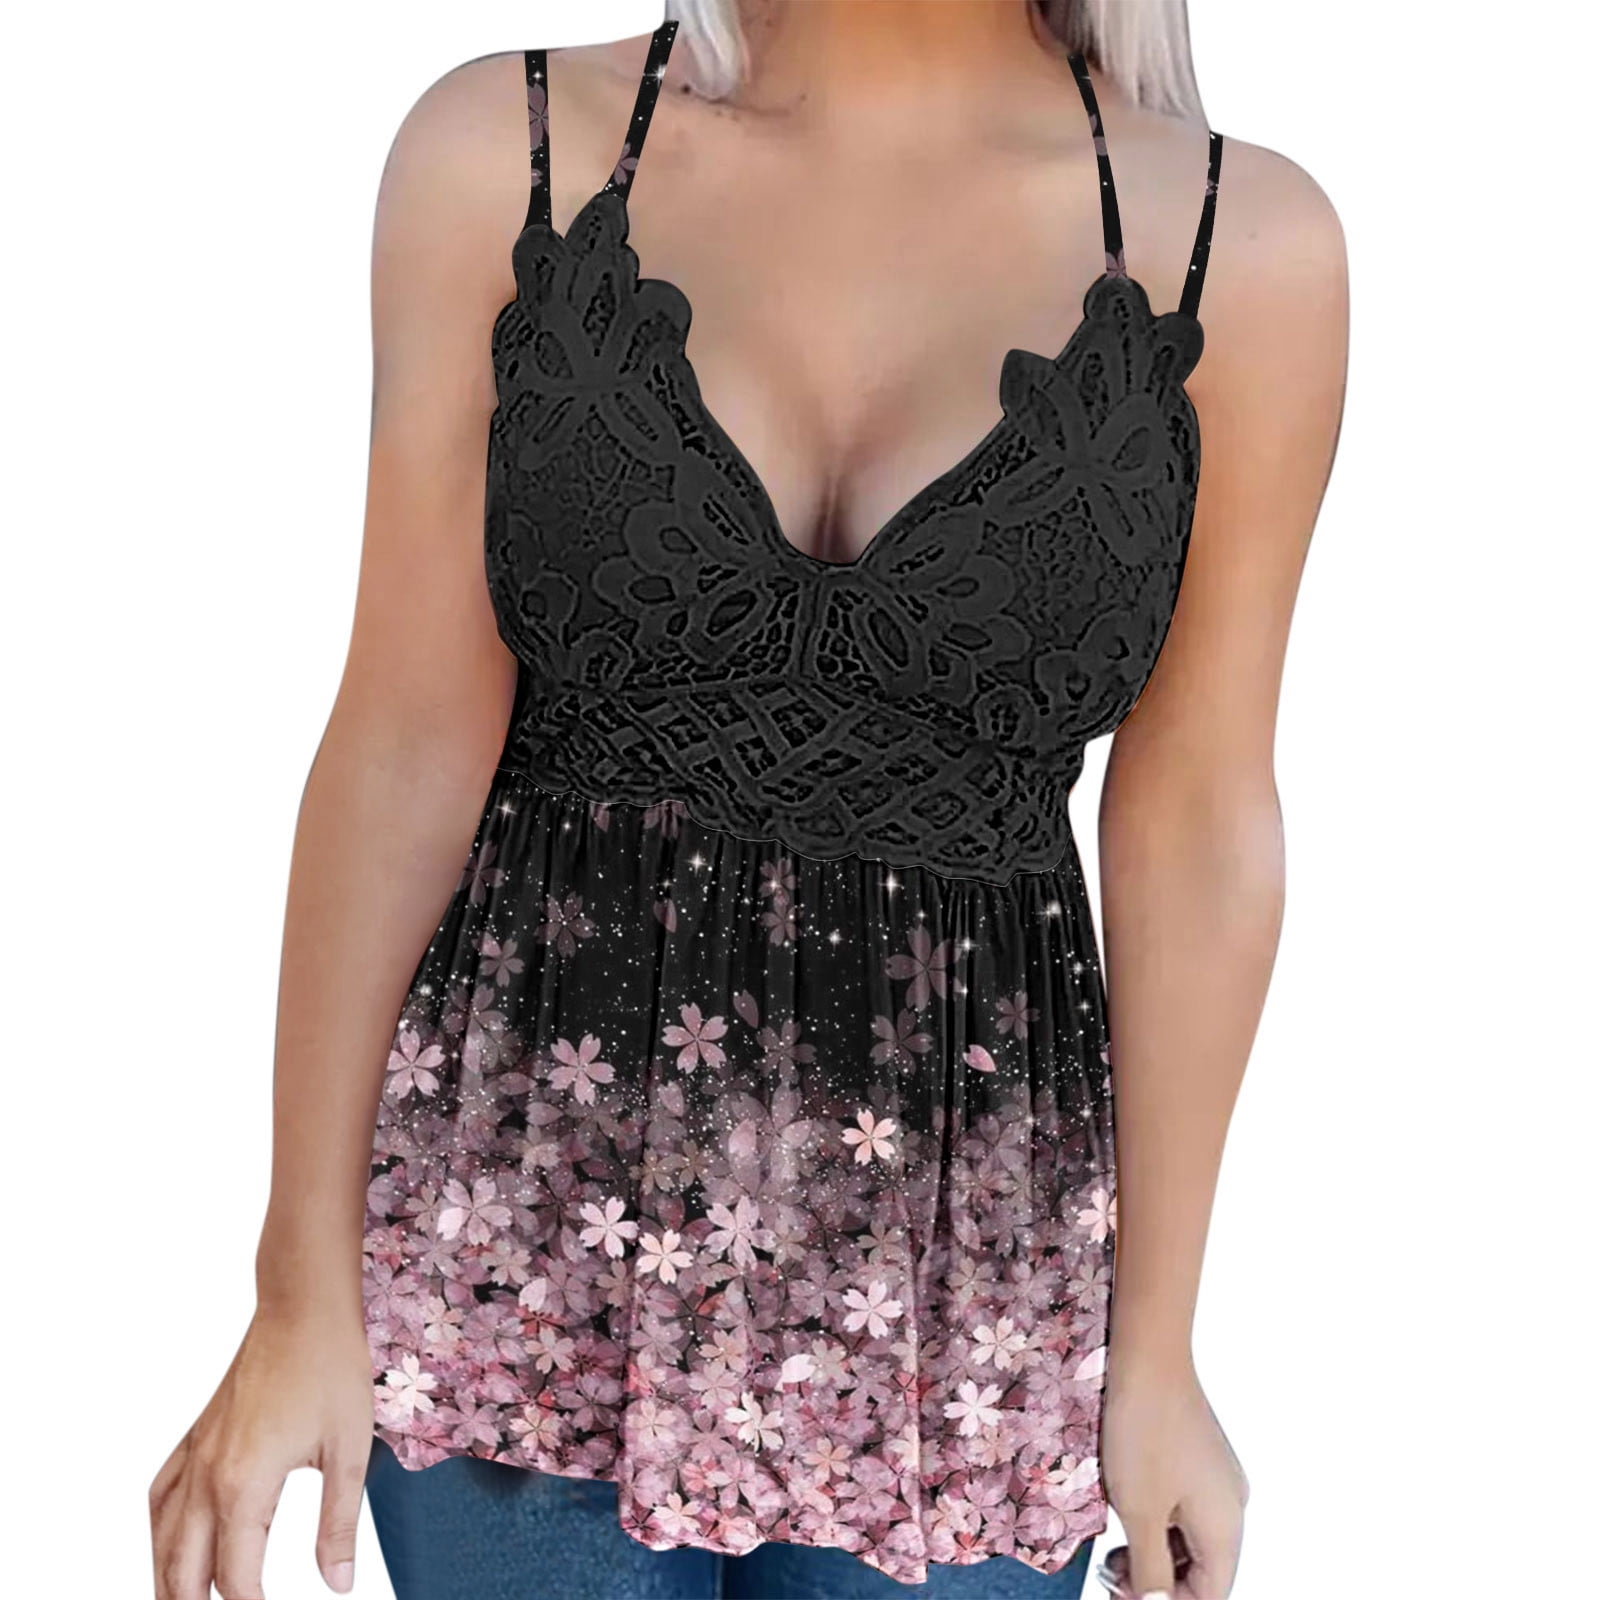 Top Cleavage Summer Top For Women Lace Deep V Neck Chiffon Cami